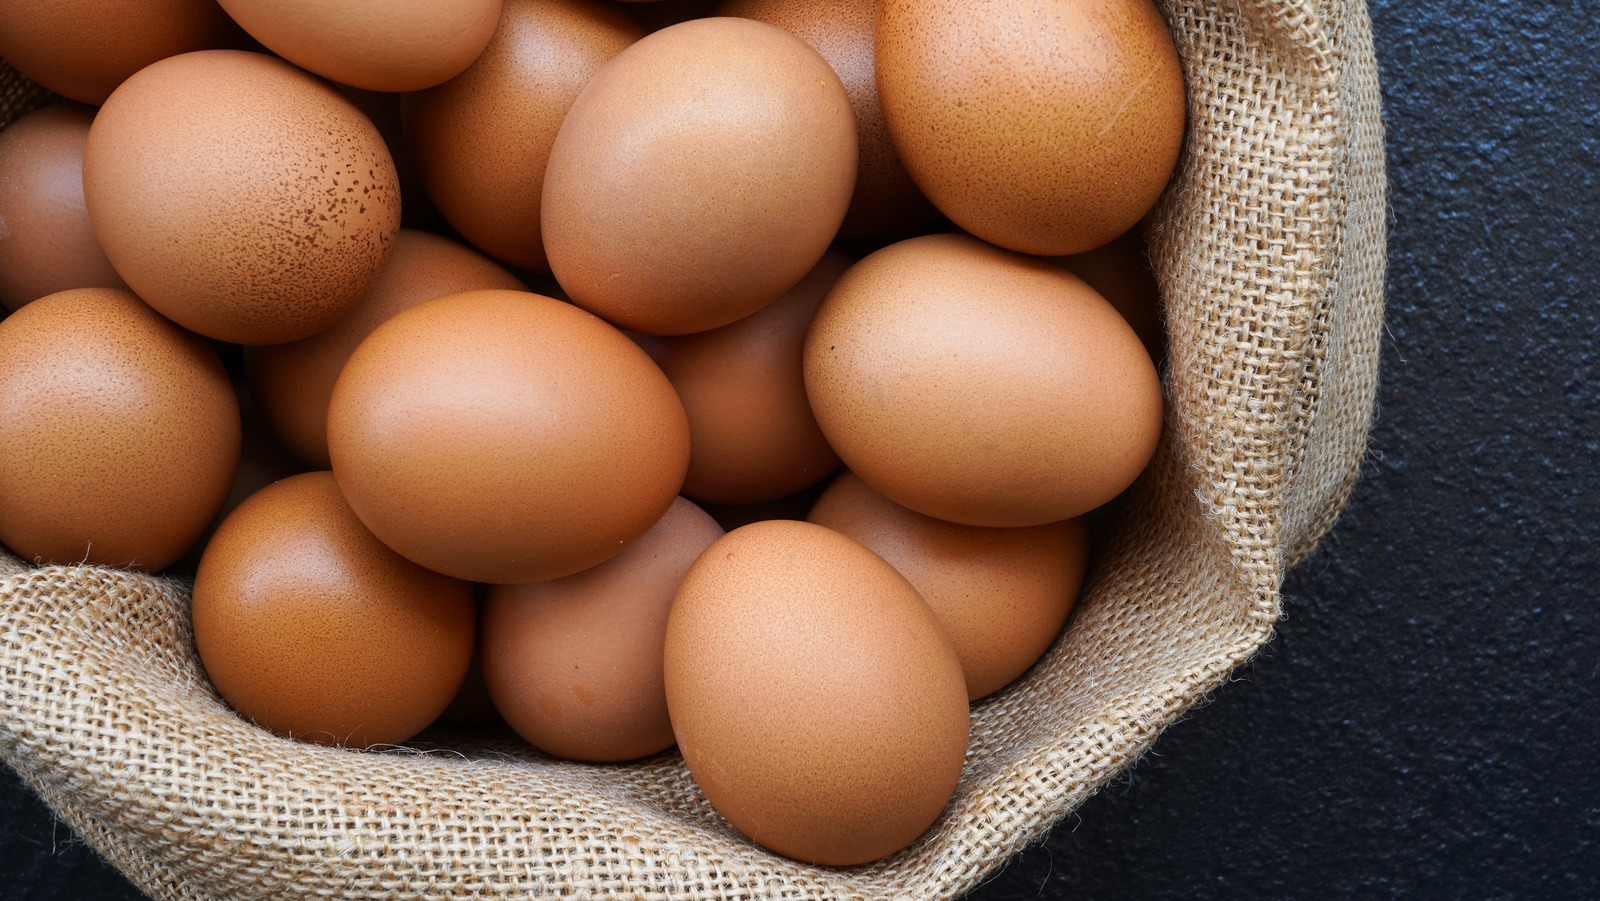 If You Drink Raw Eggs Every Day, This Will Happen To Your Body